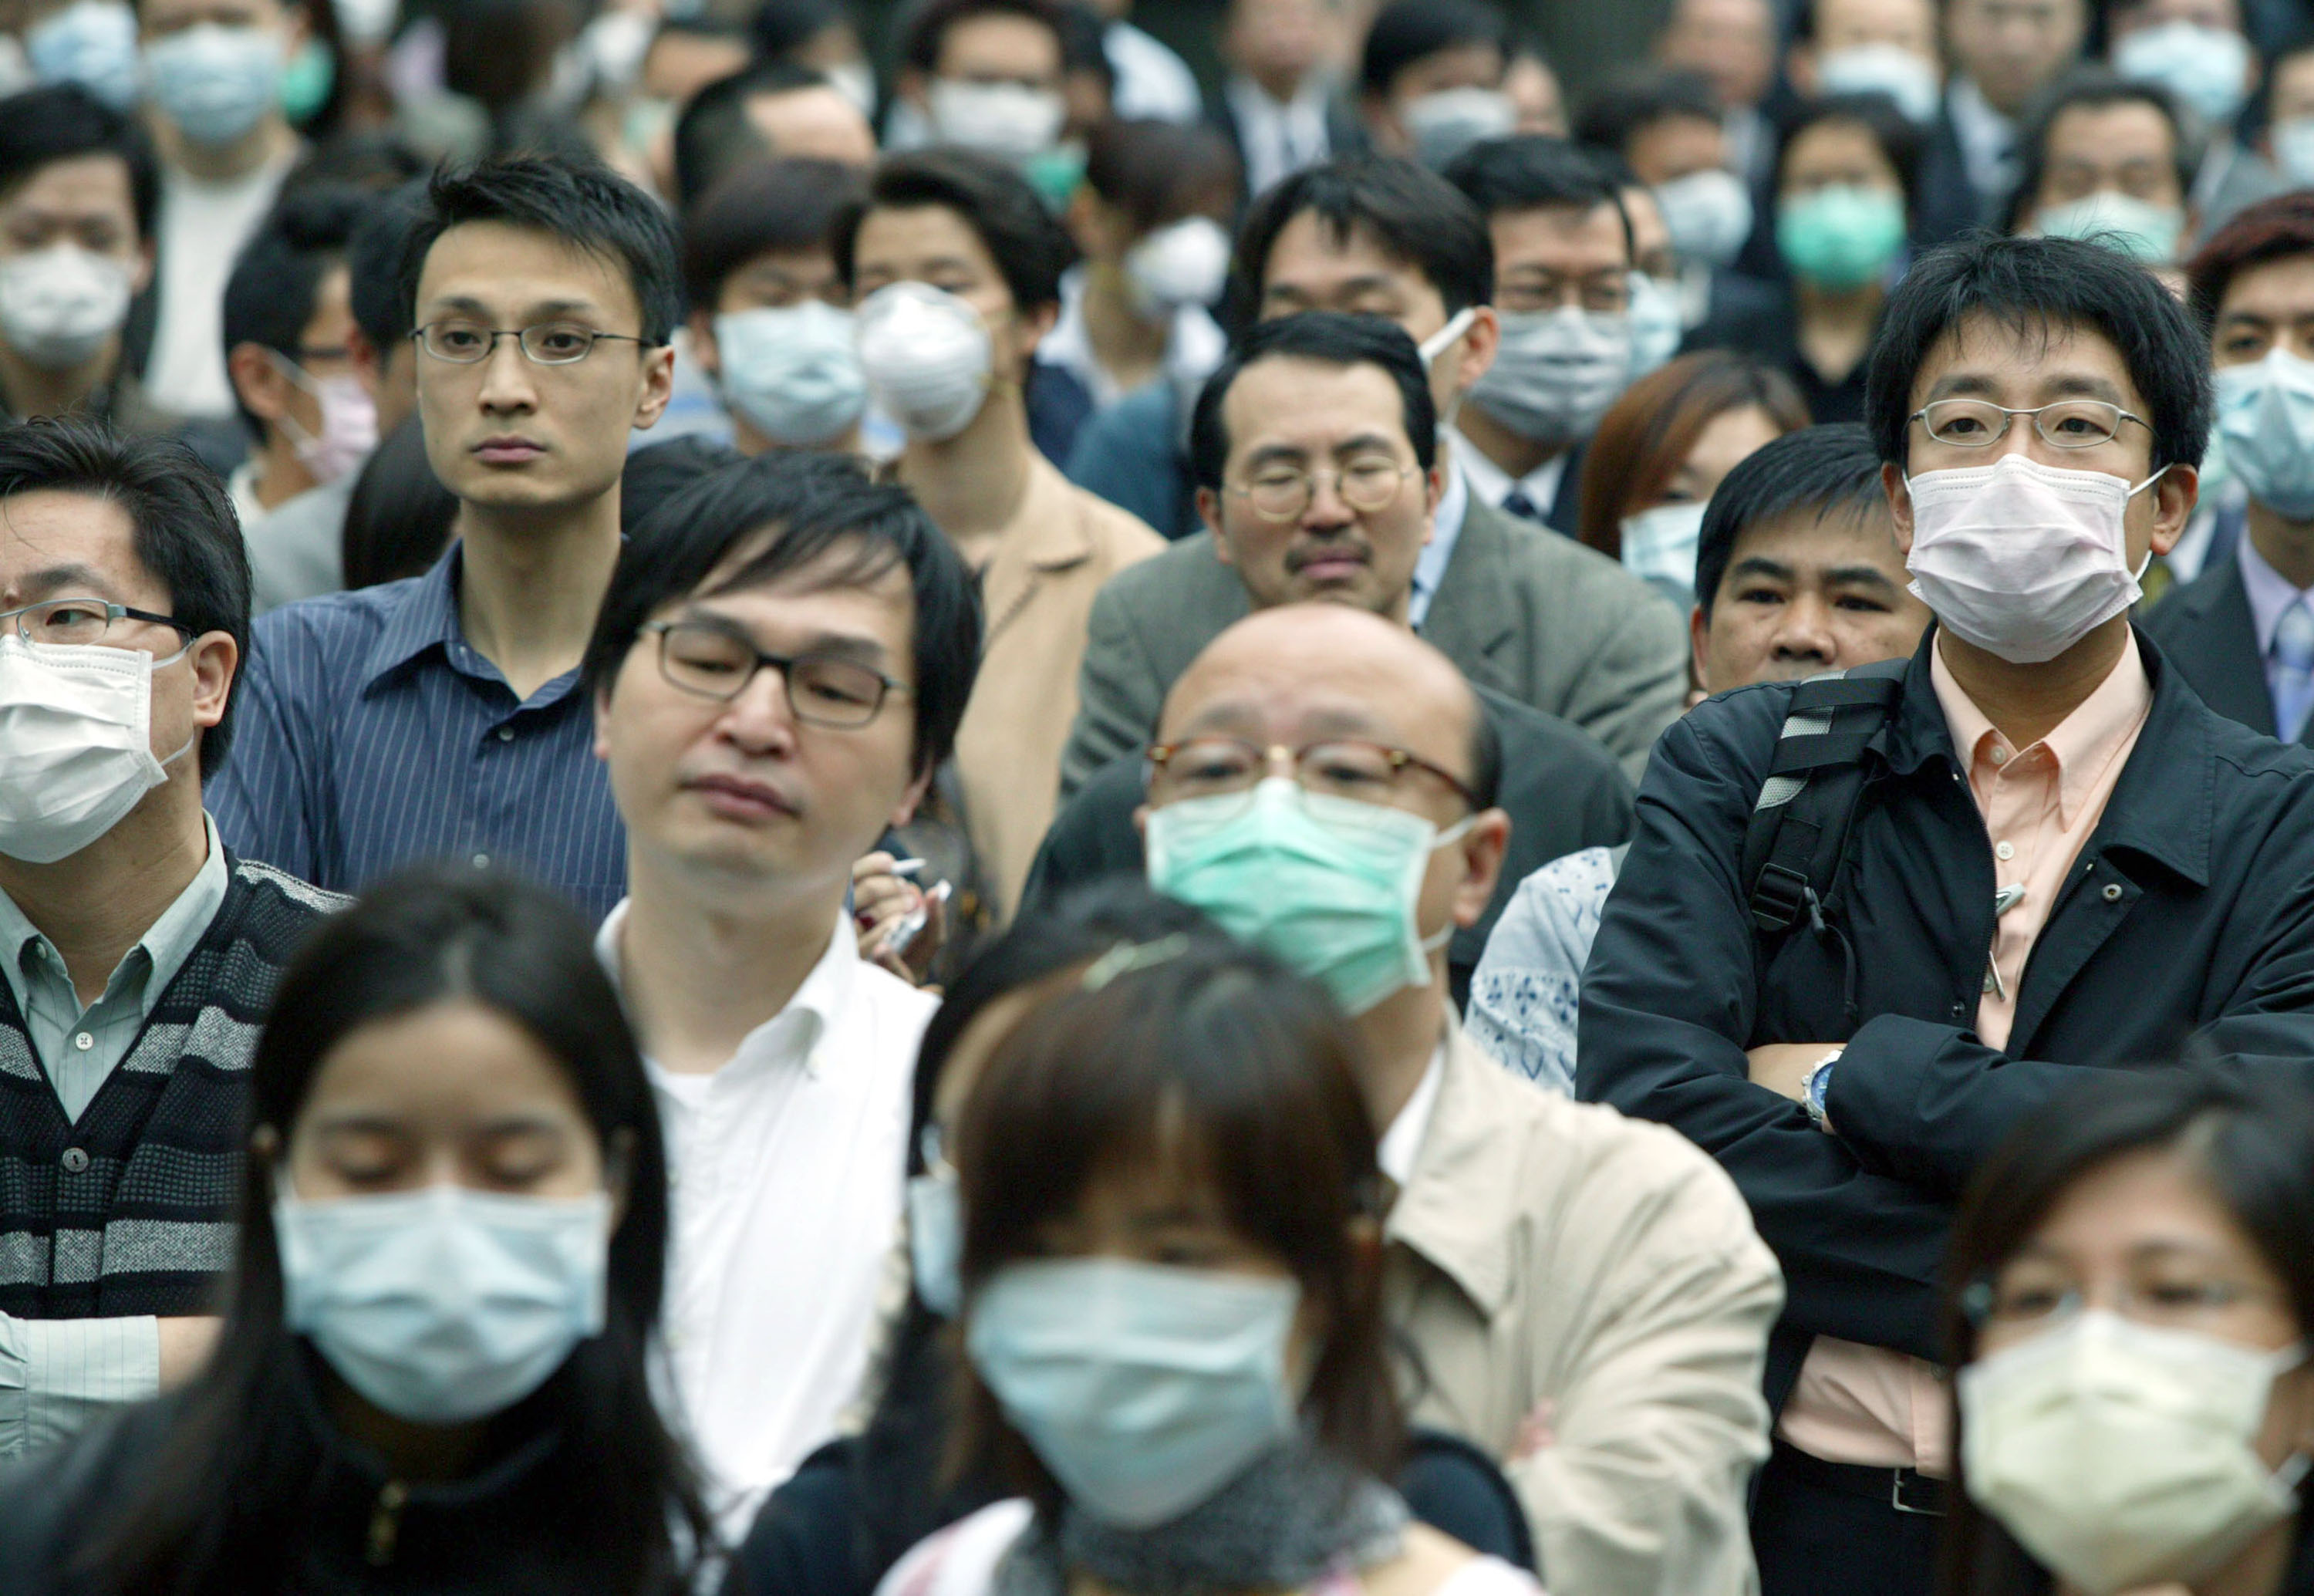 People wear masks to protect themselves against the Severe Acute Respiratory Syndrome (SARS) virus April 16, 2003 in Hong Kong. Christian Keenan/Getty Images